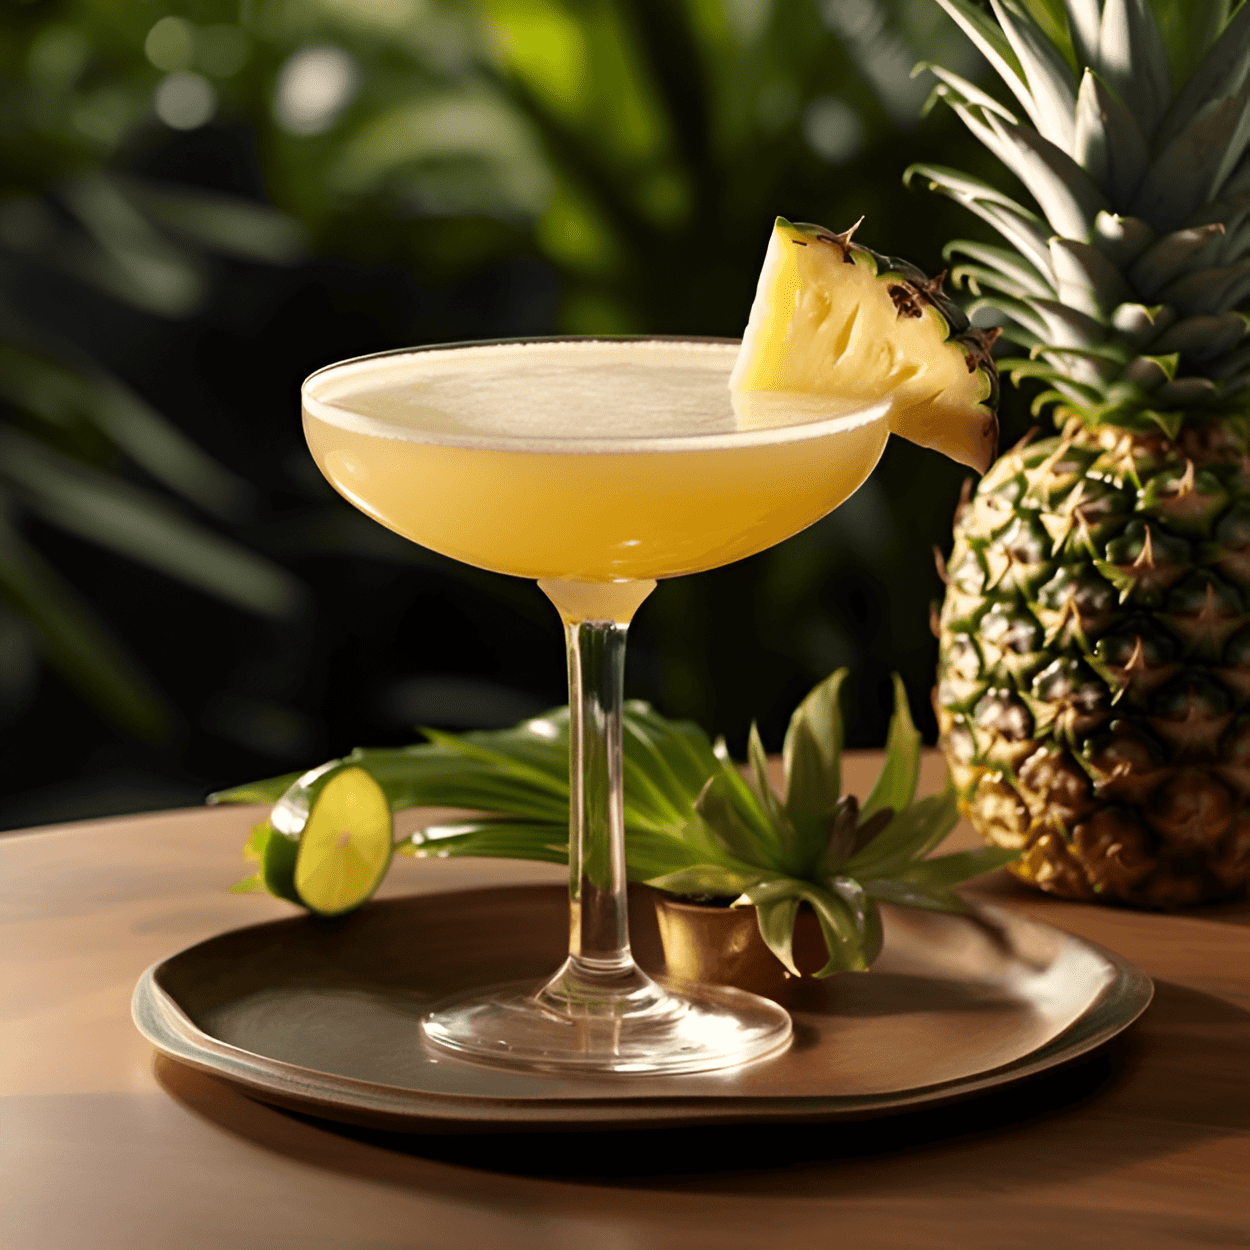 Kitty Cocktail Recipe - The Kitty cocktail is a delightful blend of sweet and sour. The sweetness of the pineapple juice is perfectly balanced by the tartness of the lime juice. The gin adds a subtle hint of juniper, making it a light, refreshing, and fruity cocktail.